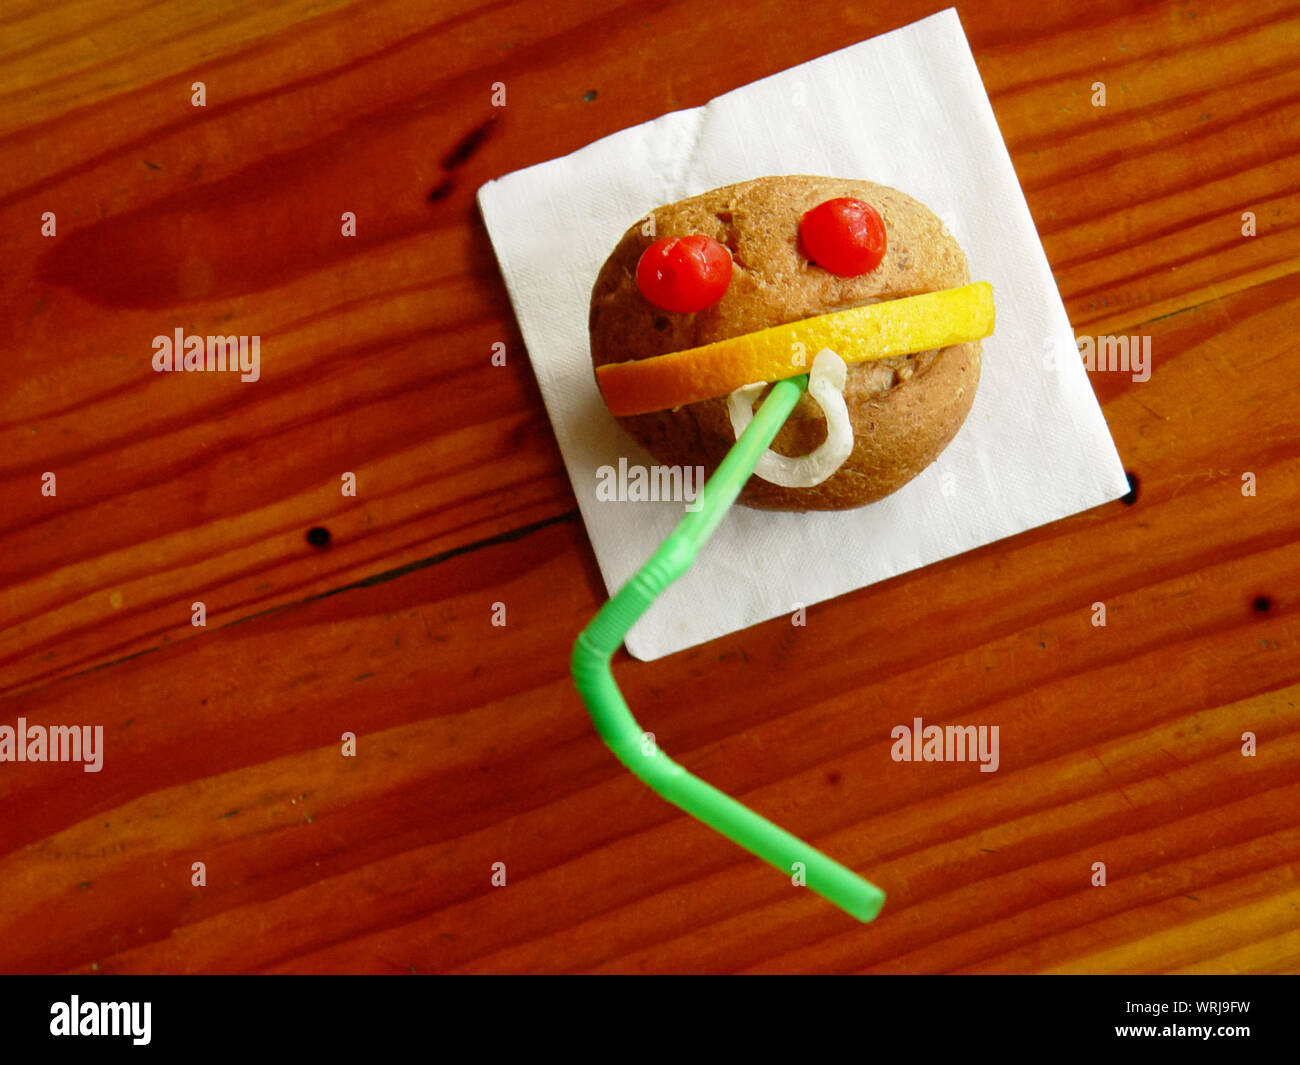 Directly Above Shot Of Food Art On Table Stock Photo